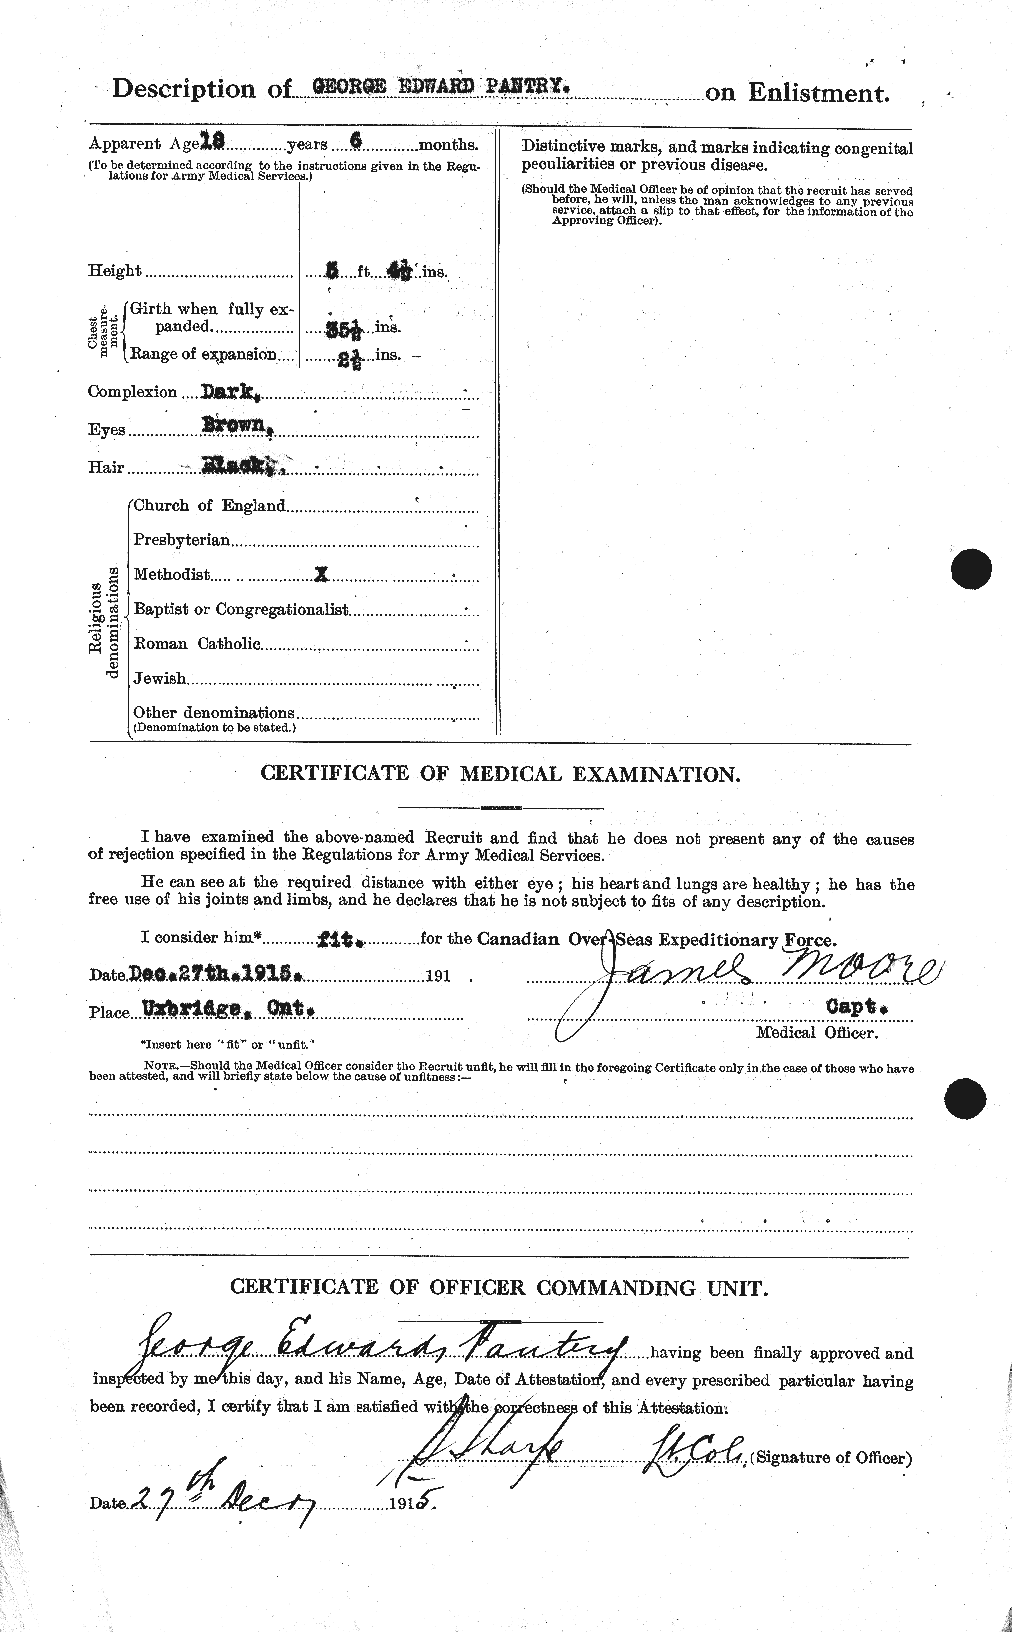 Personnel Records of the First World War - CEF 563455b